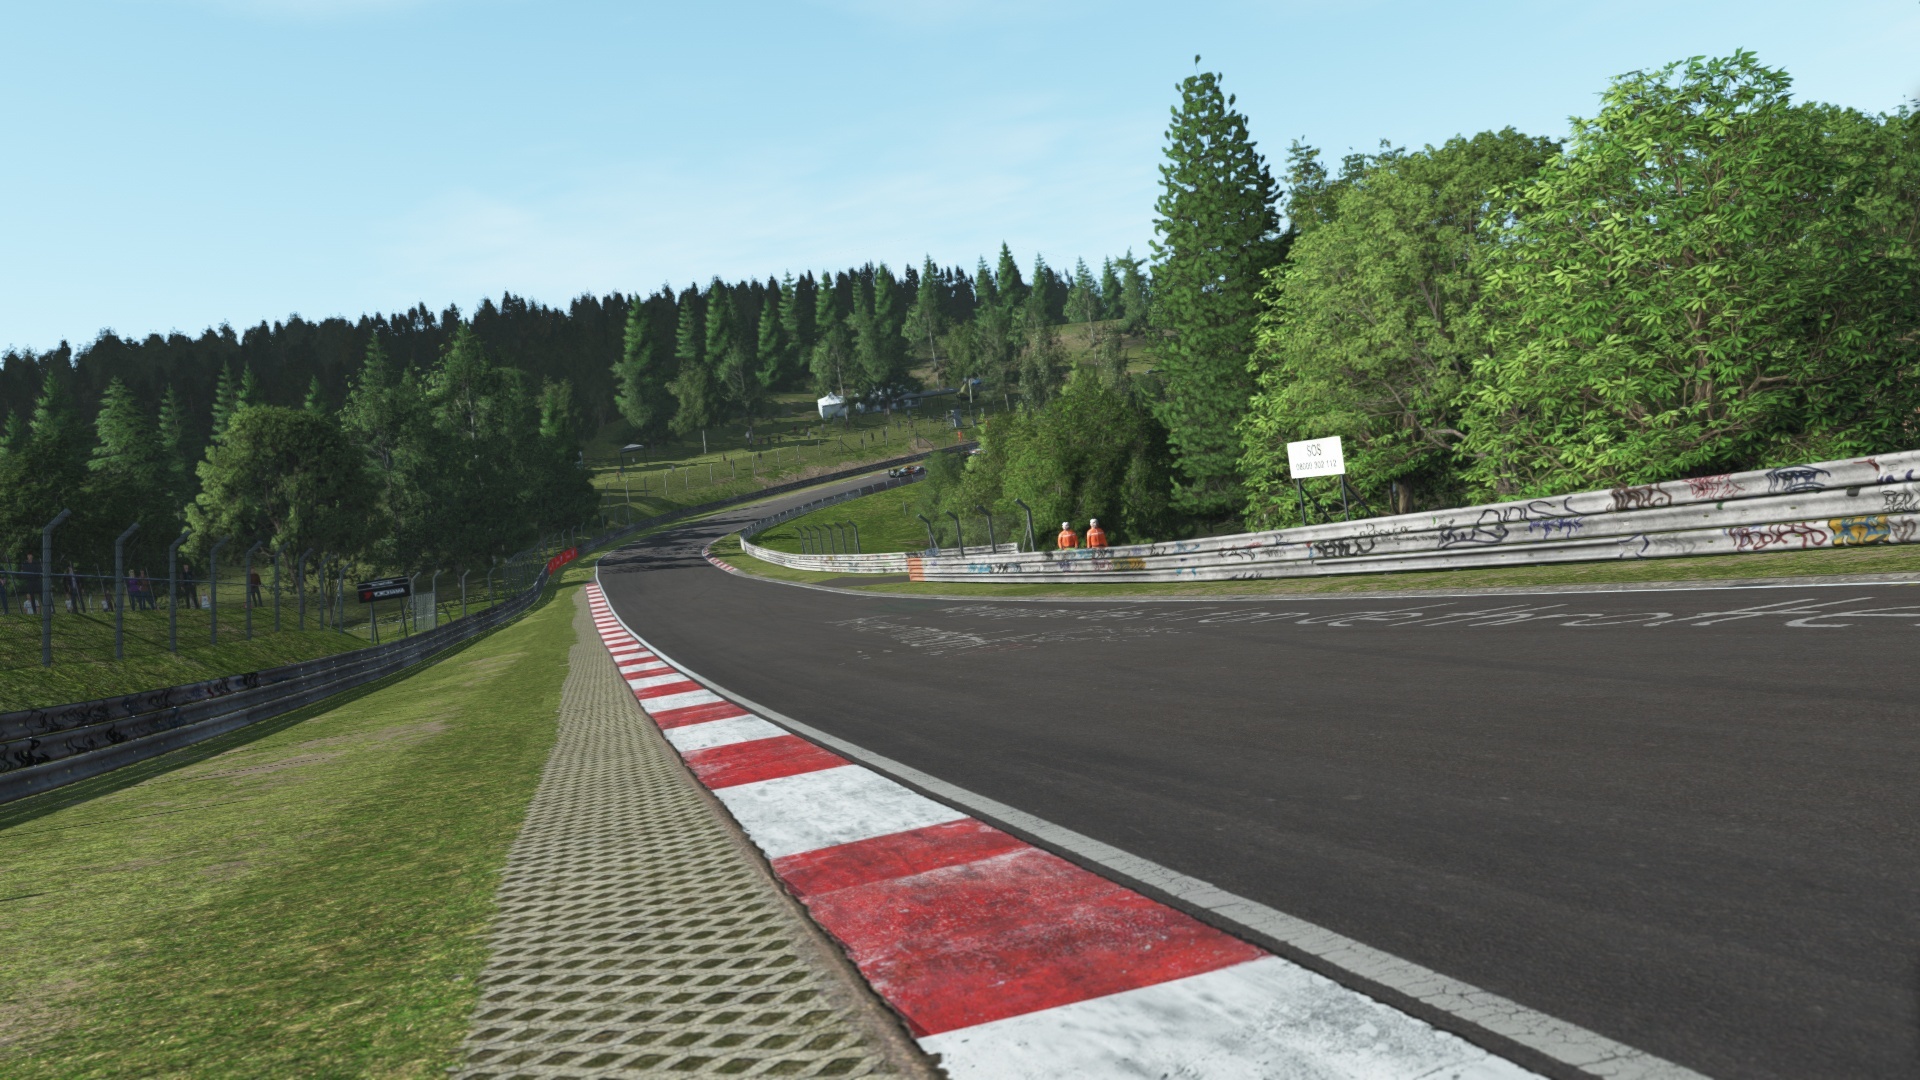 Drive the Nurburgring in Google Maps - A+E Interactive